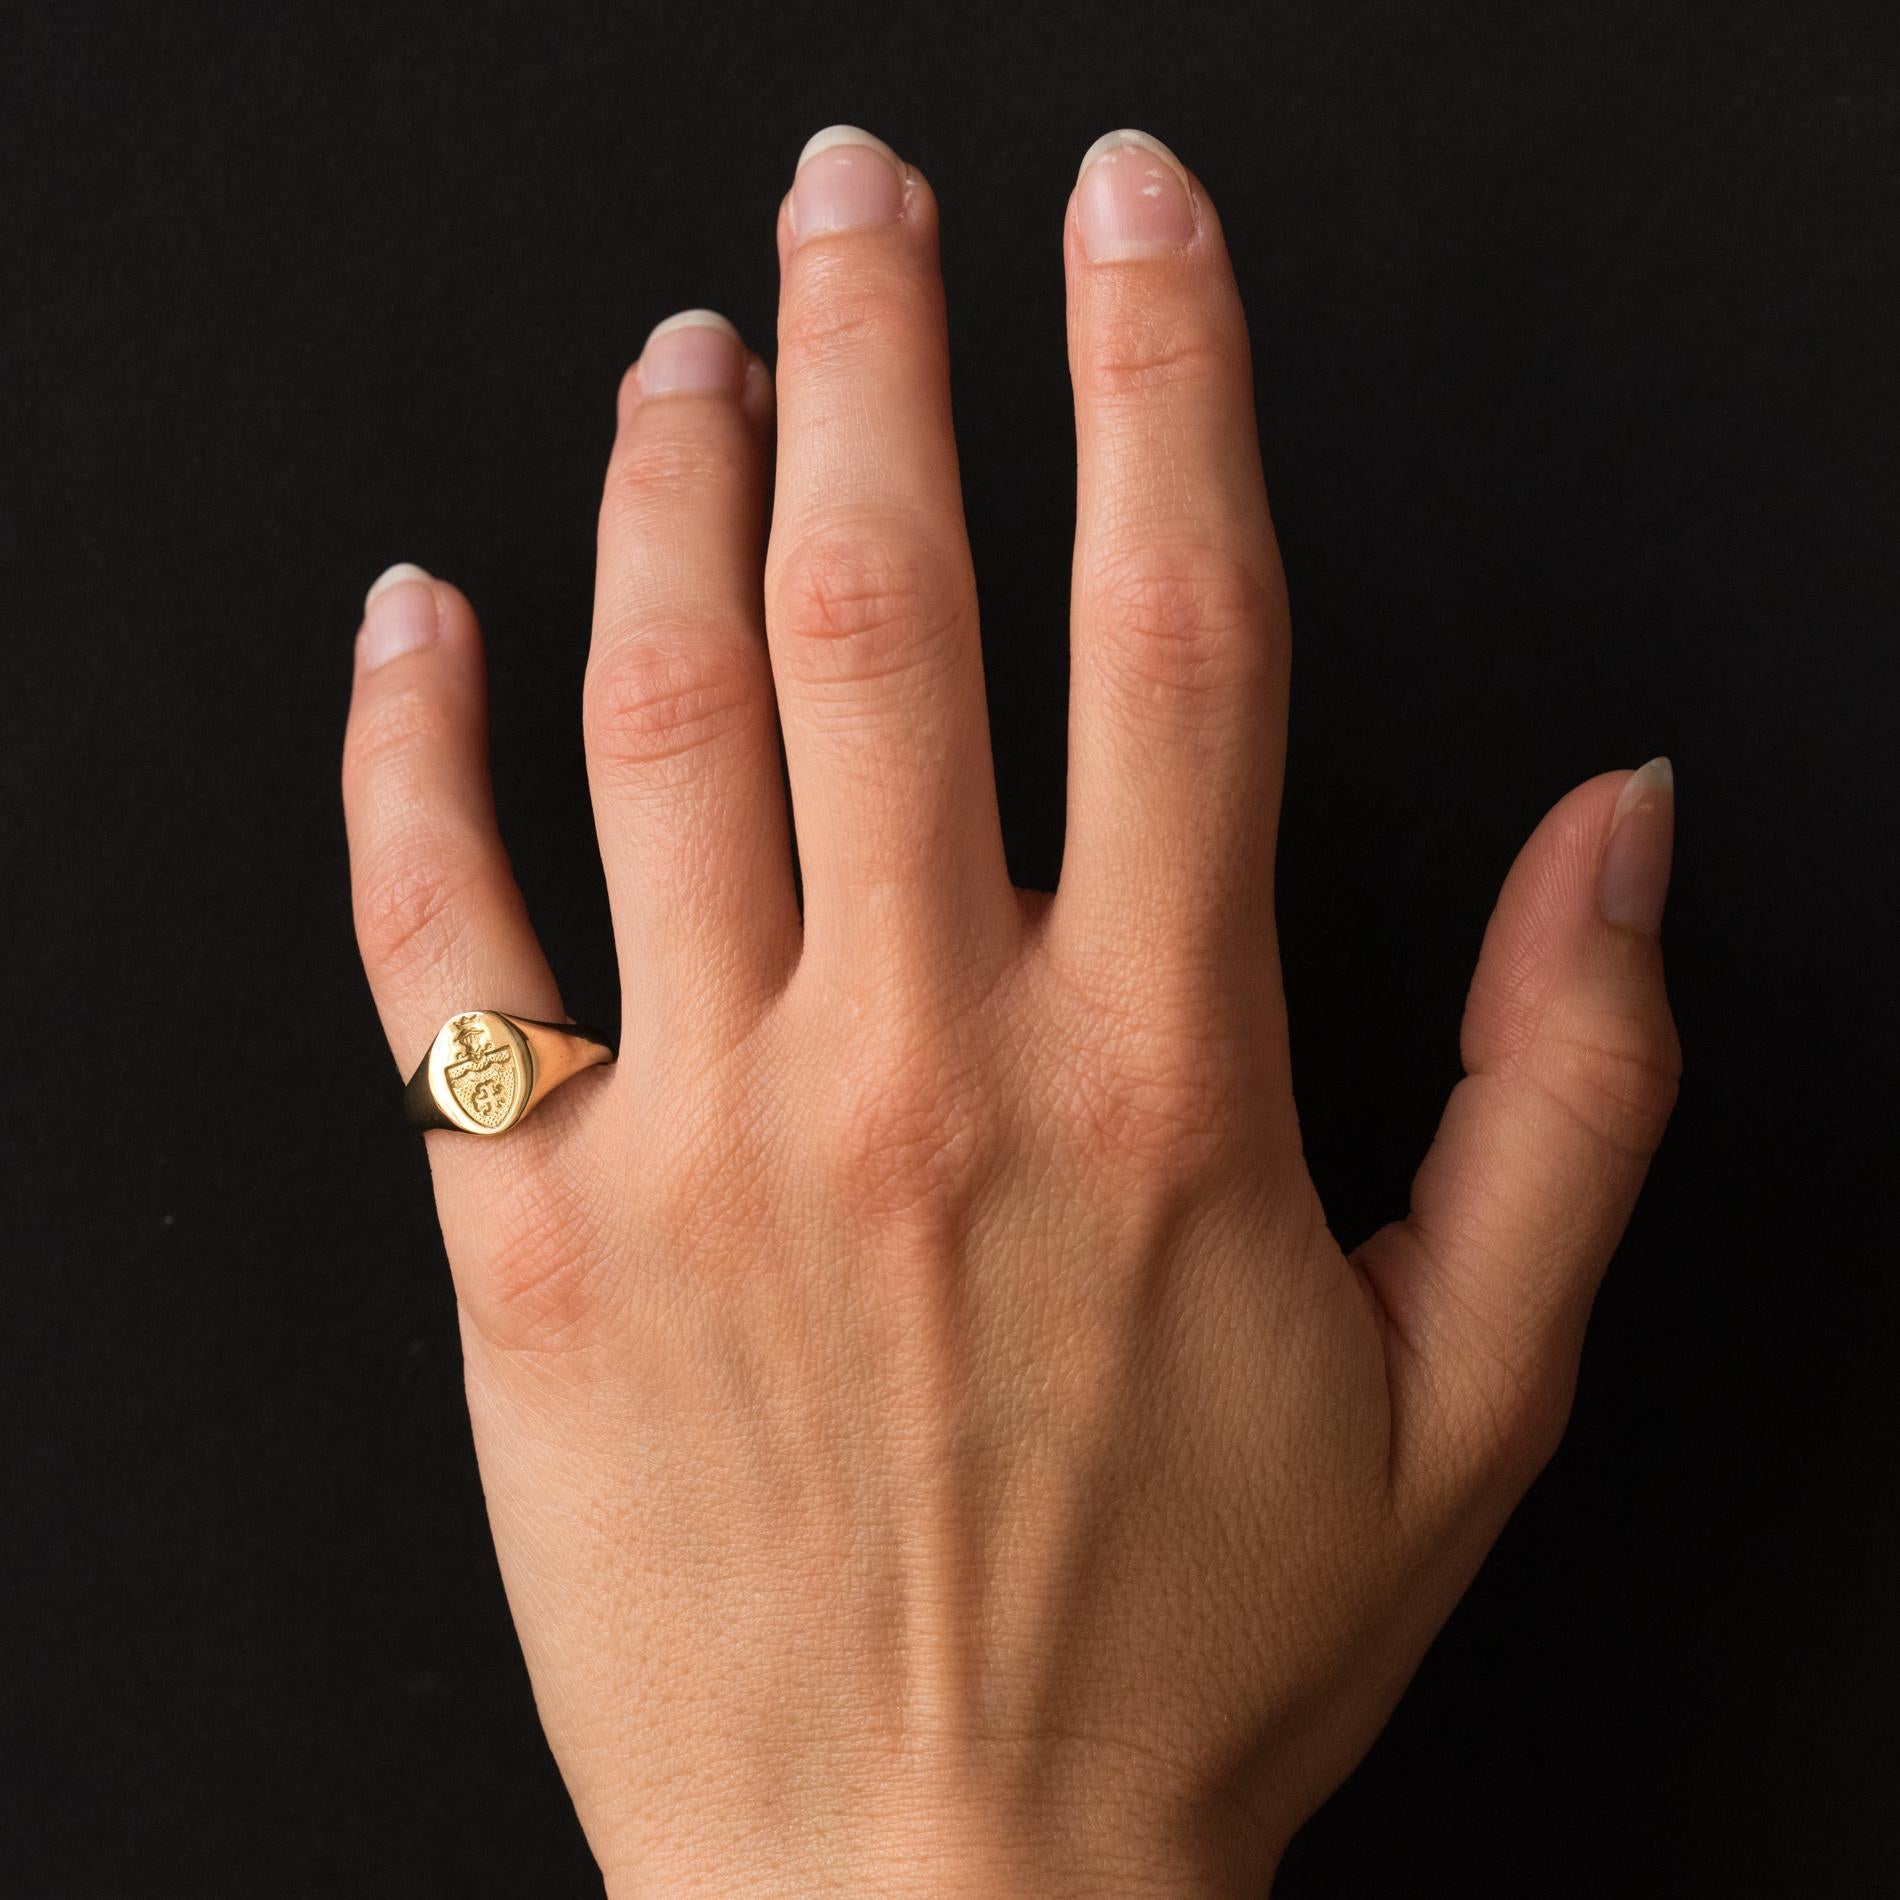 Women signet ring in 18 karats yellow gold, eagle's head hallmark.
Signet ring for women, it is decorated with a blazon wearing a crowned helmet.
Height: 10.7 mm, width: 9.5 mm, thickness: 1.7 mm, width of the ring at the base: 2.8 mm.
Total weight